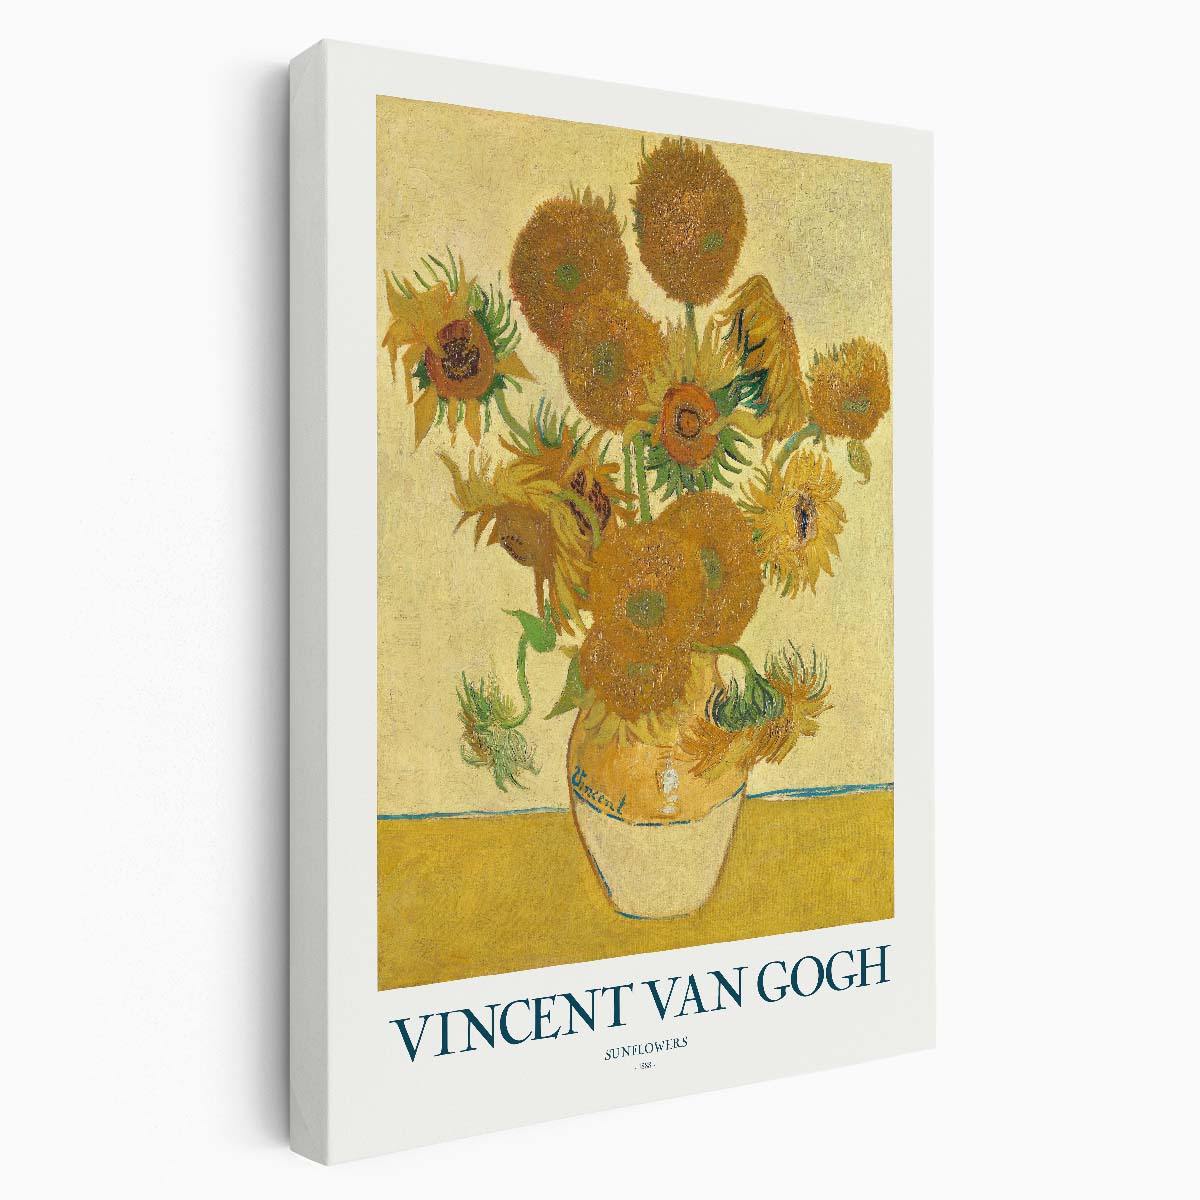 Vincent Van Gogh's Sunflowers Masterful Acrylic Floral Art Print by Luxuriance Designs, made in USA